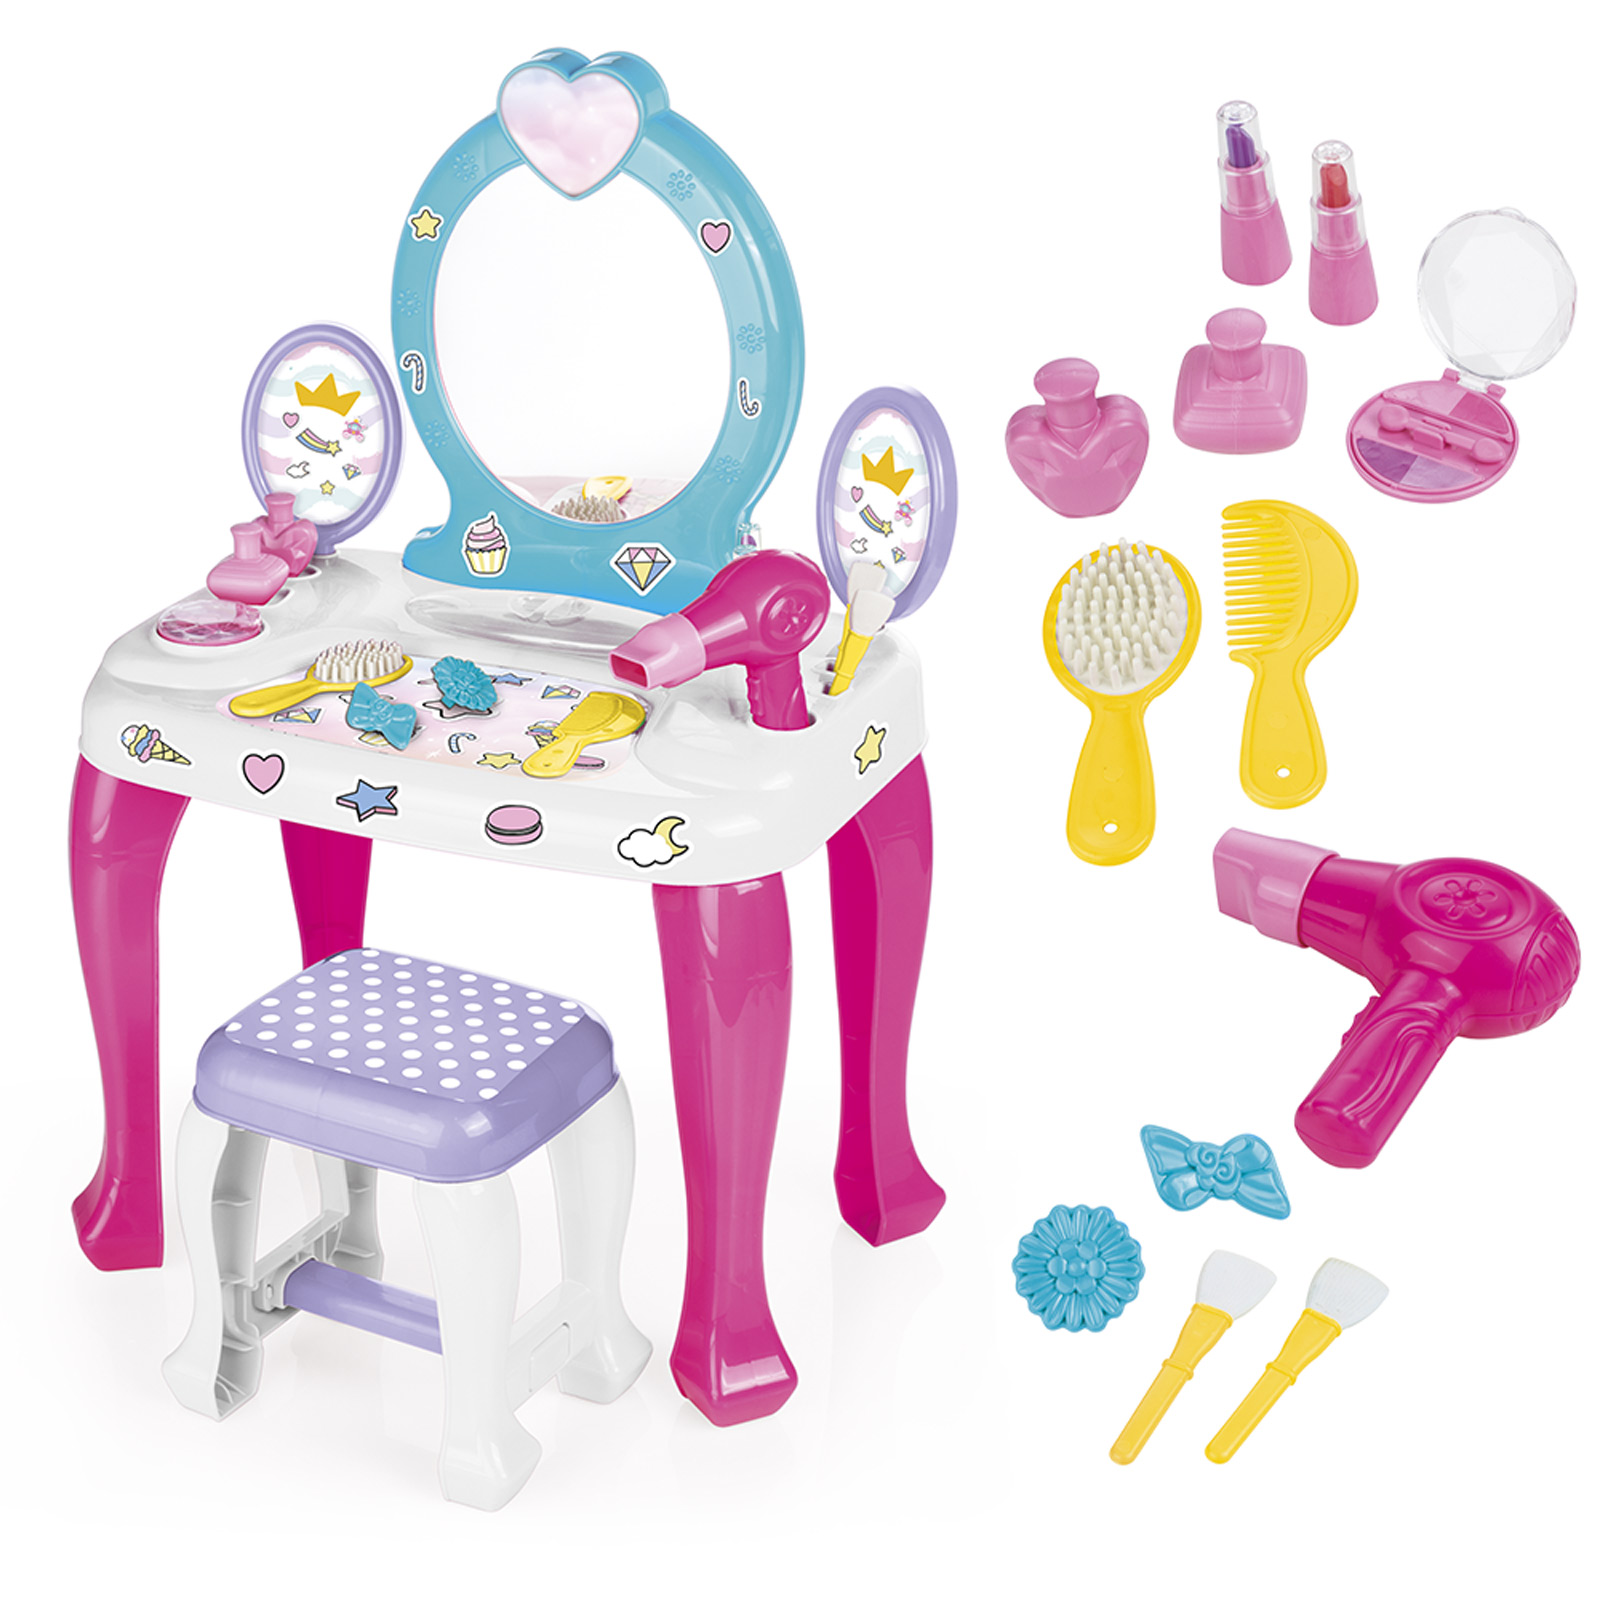 Unicorn Vanity Table Set With Mirror, Stool & 12 Accessories - Pink & White (3 - 6 Years)